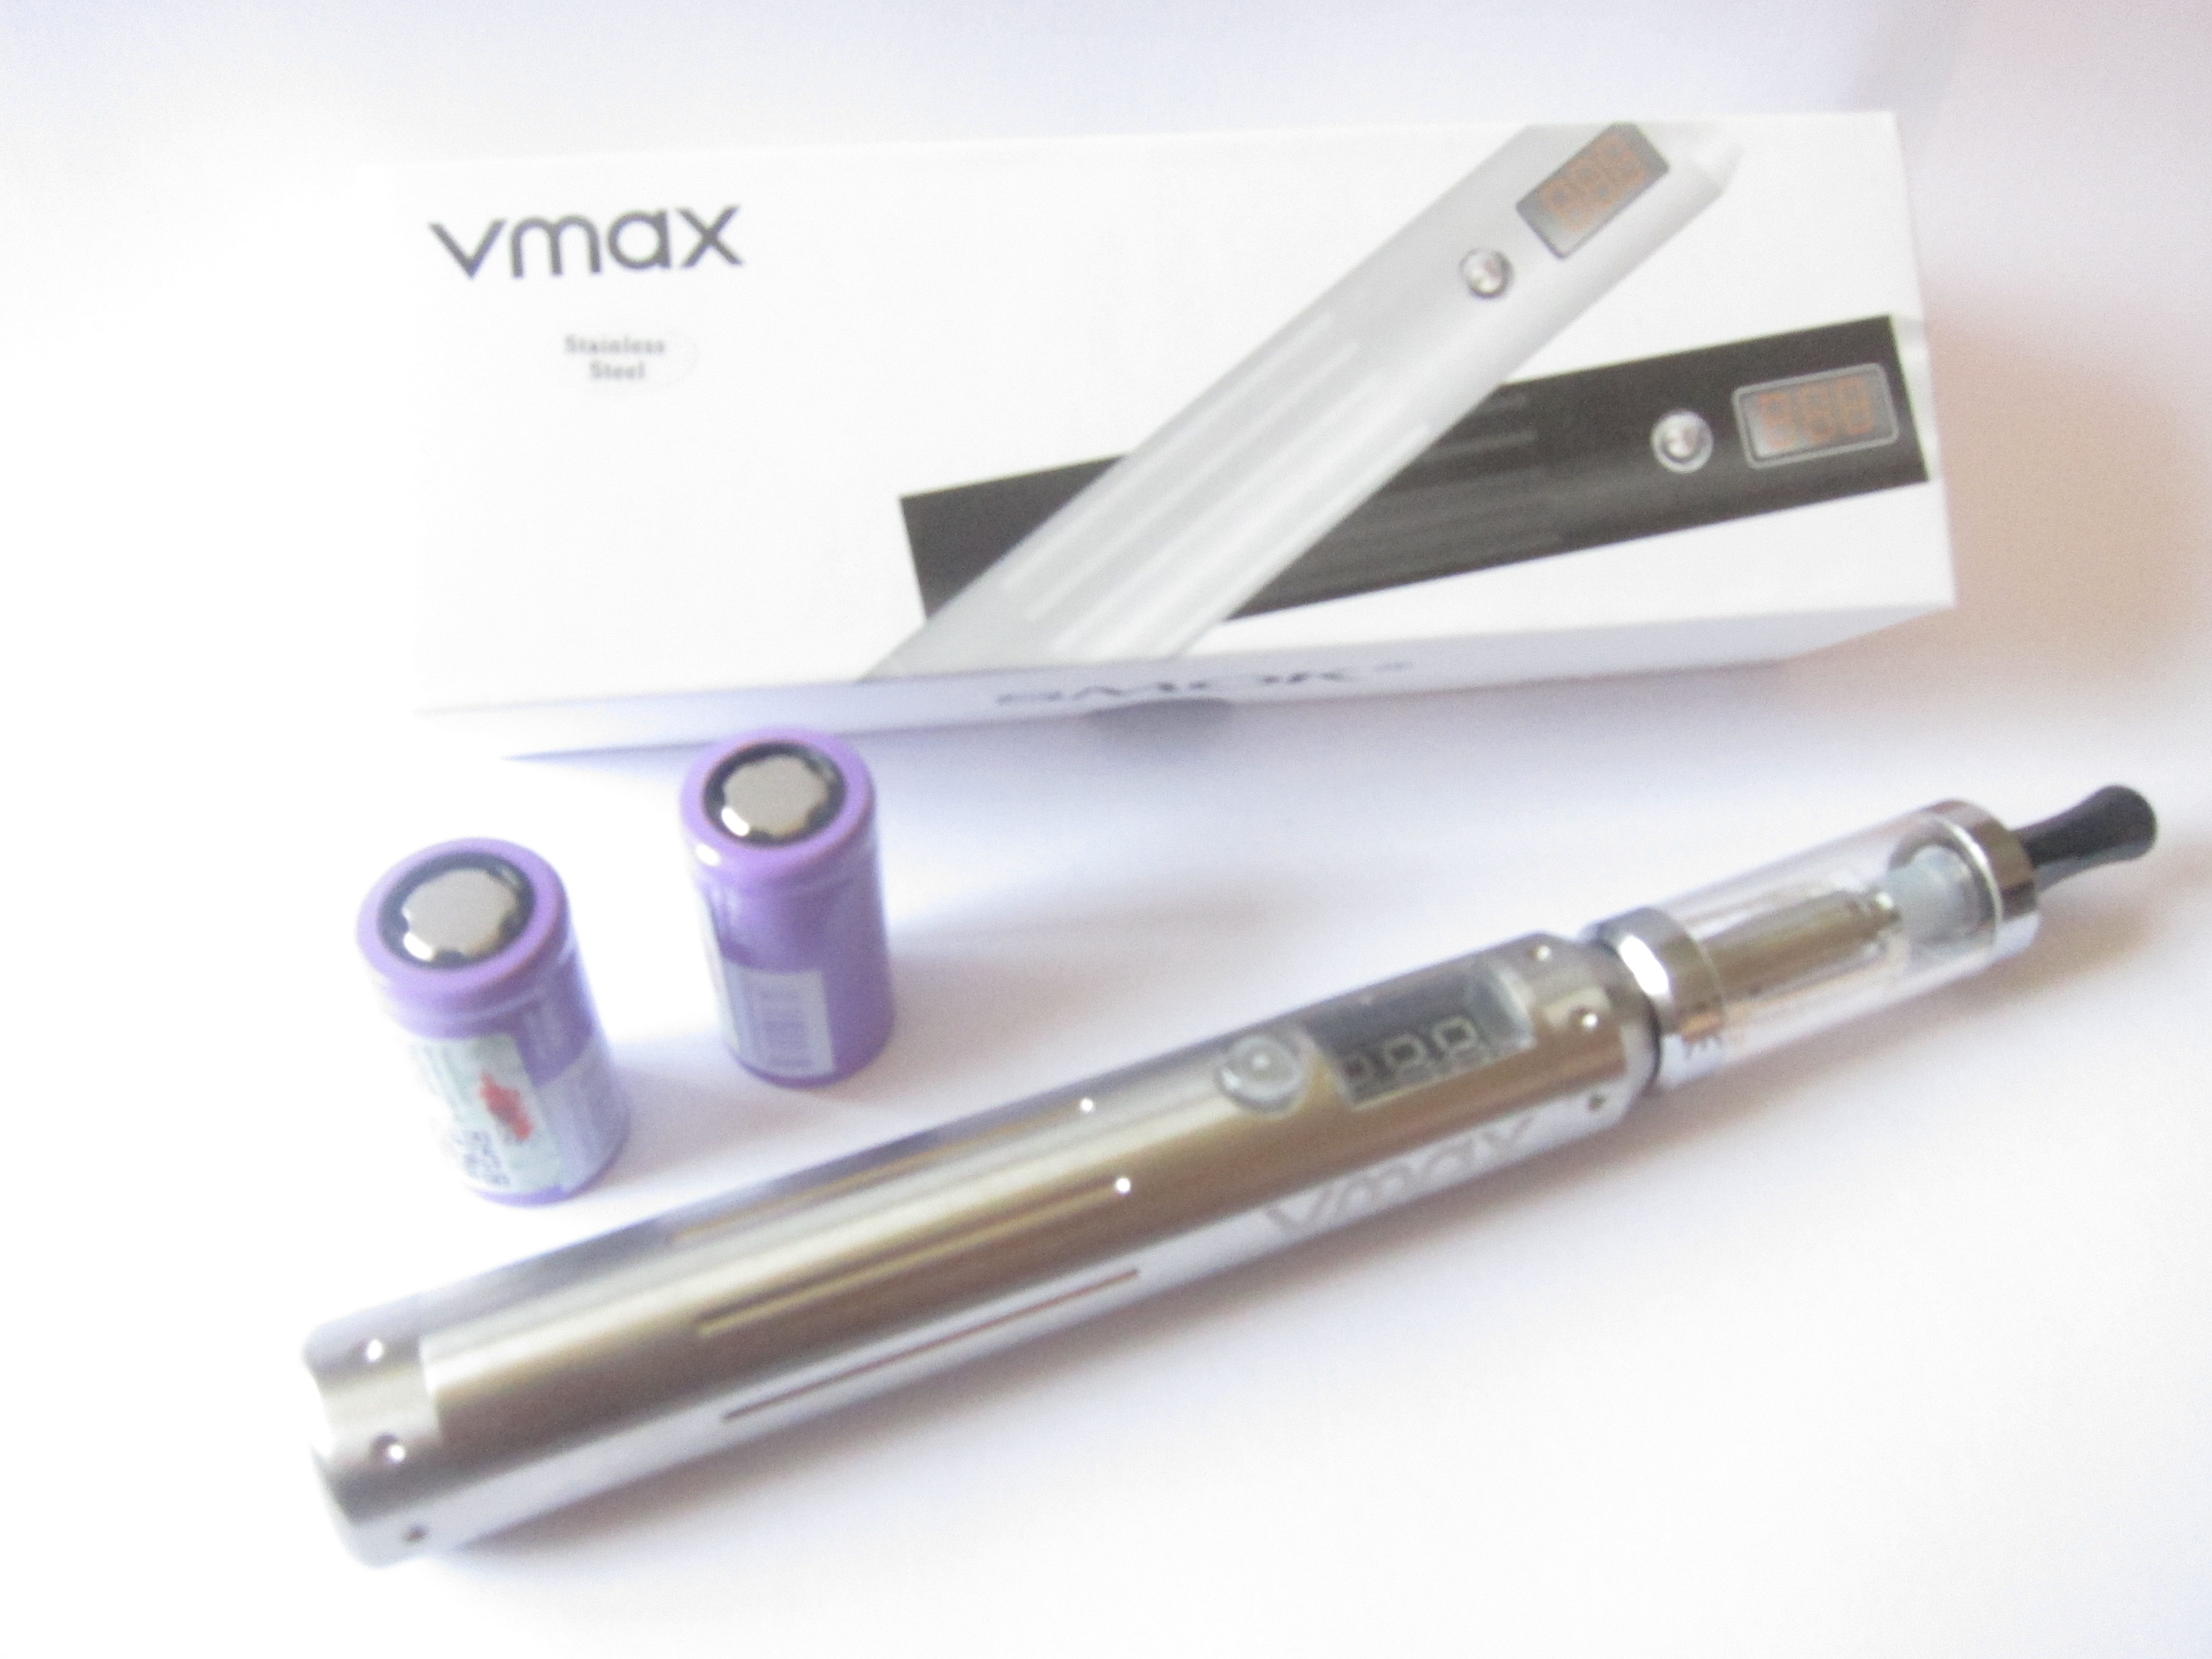 Vmax mod with DS3 atomizer and 18350 batteries kit